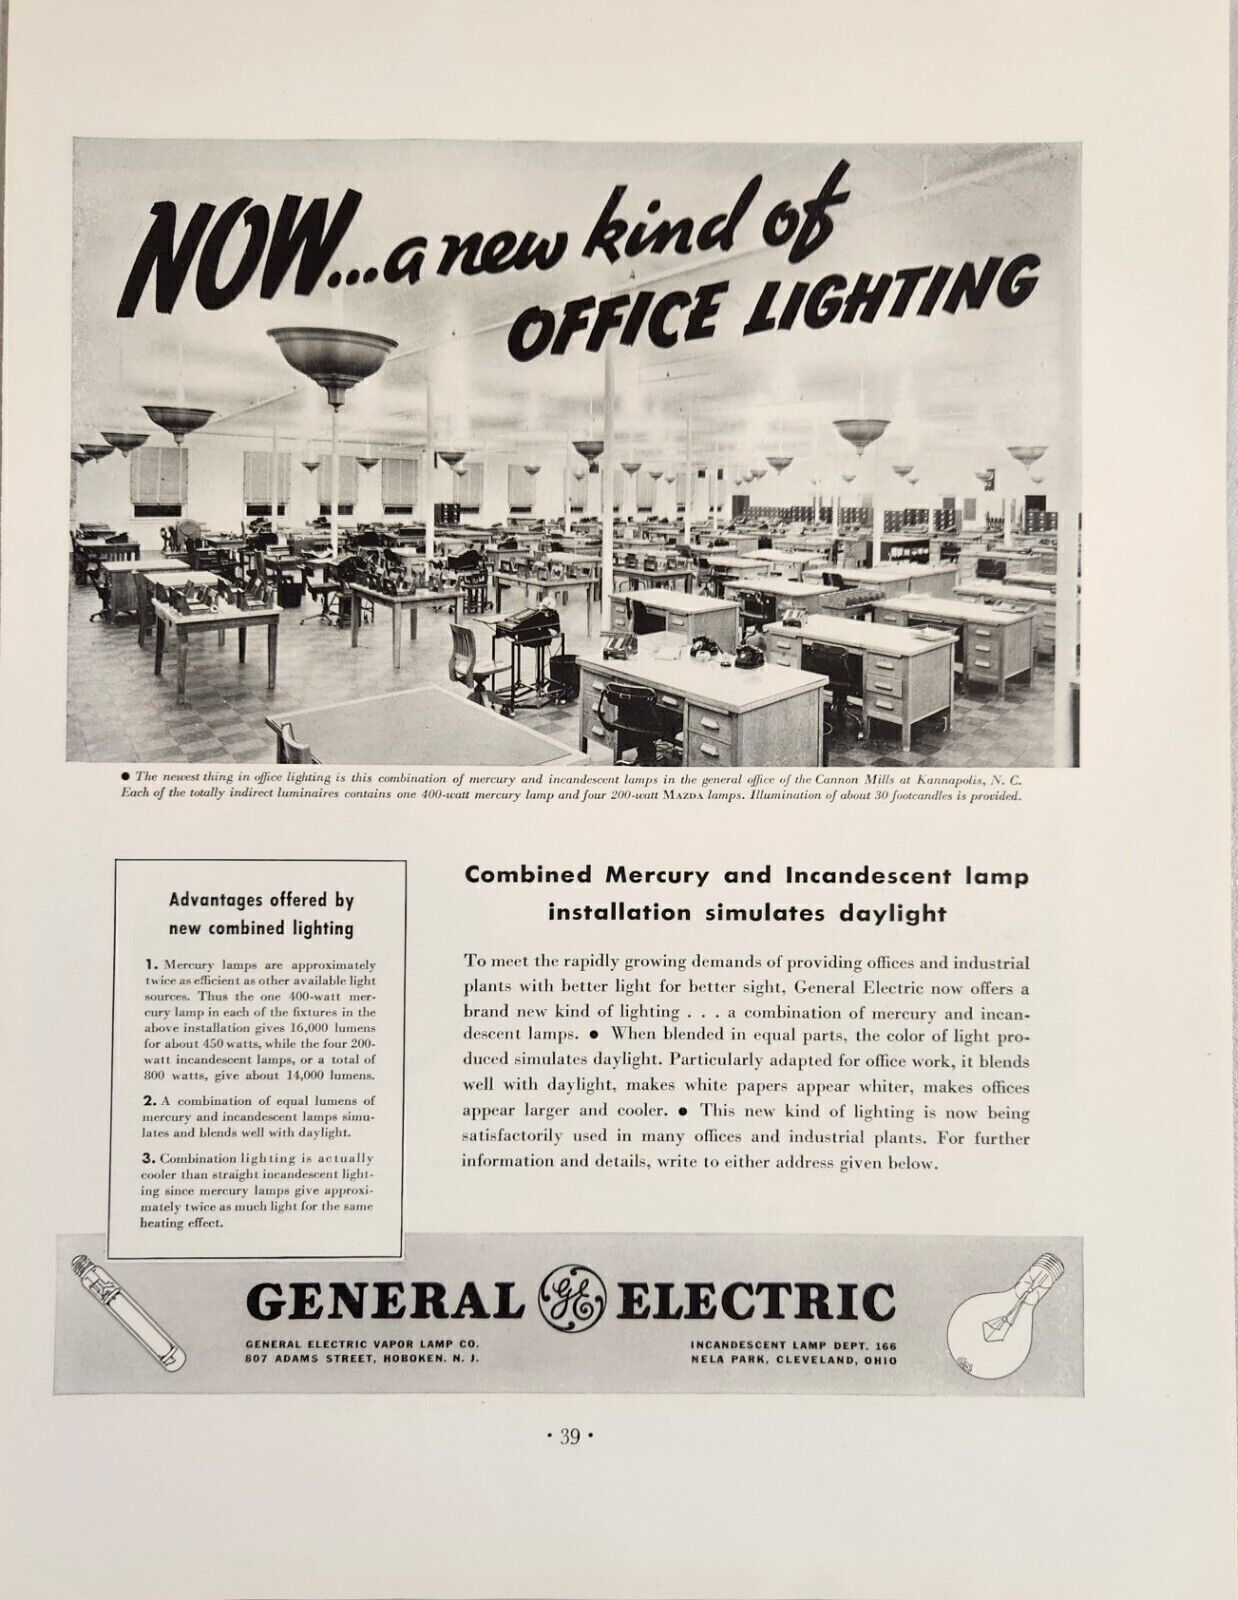 1936 Print Ad General Electric A New Kind of Office Lighting Hoboken,New Jersey